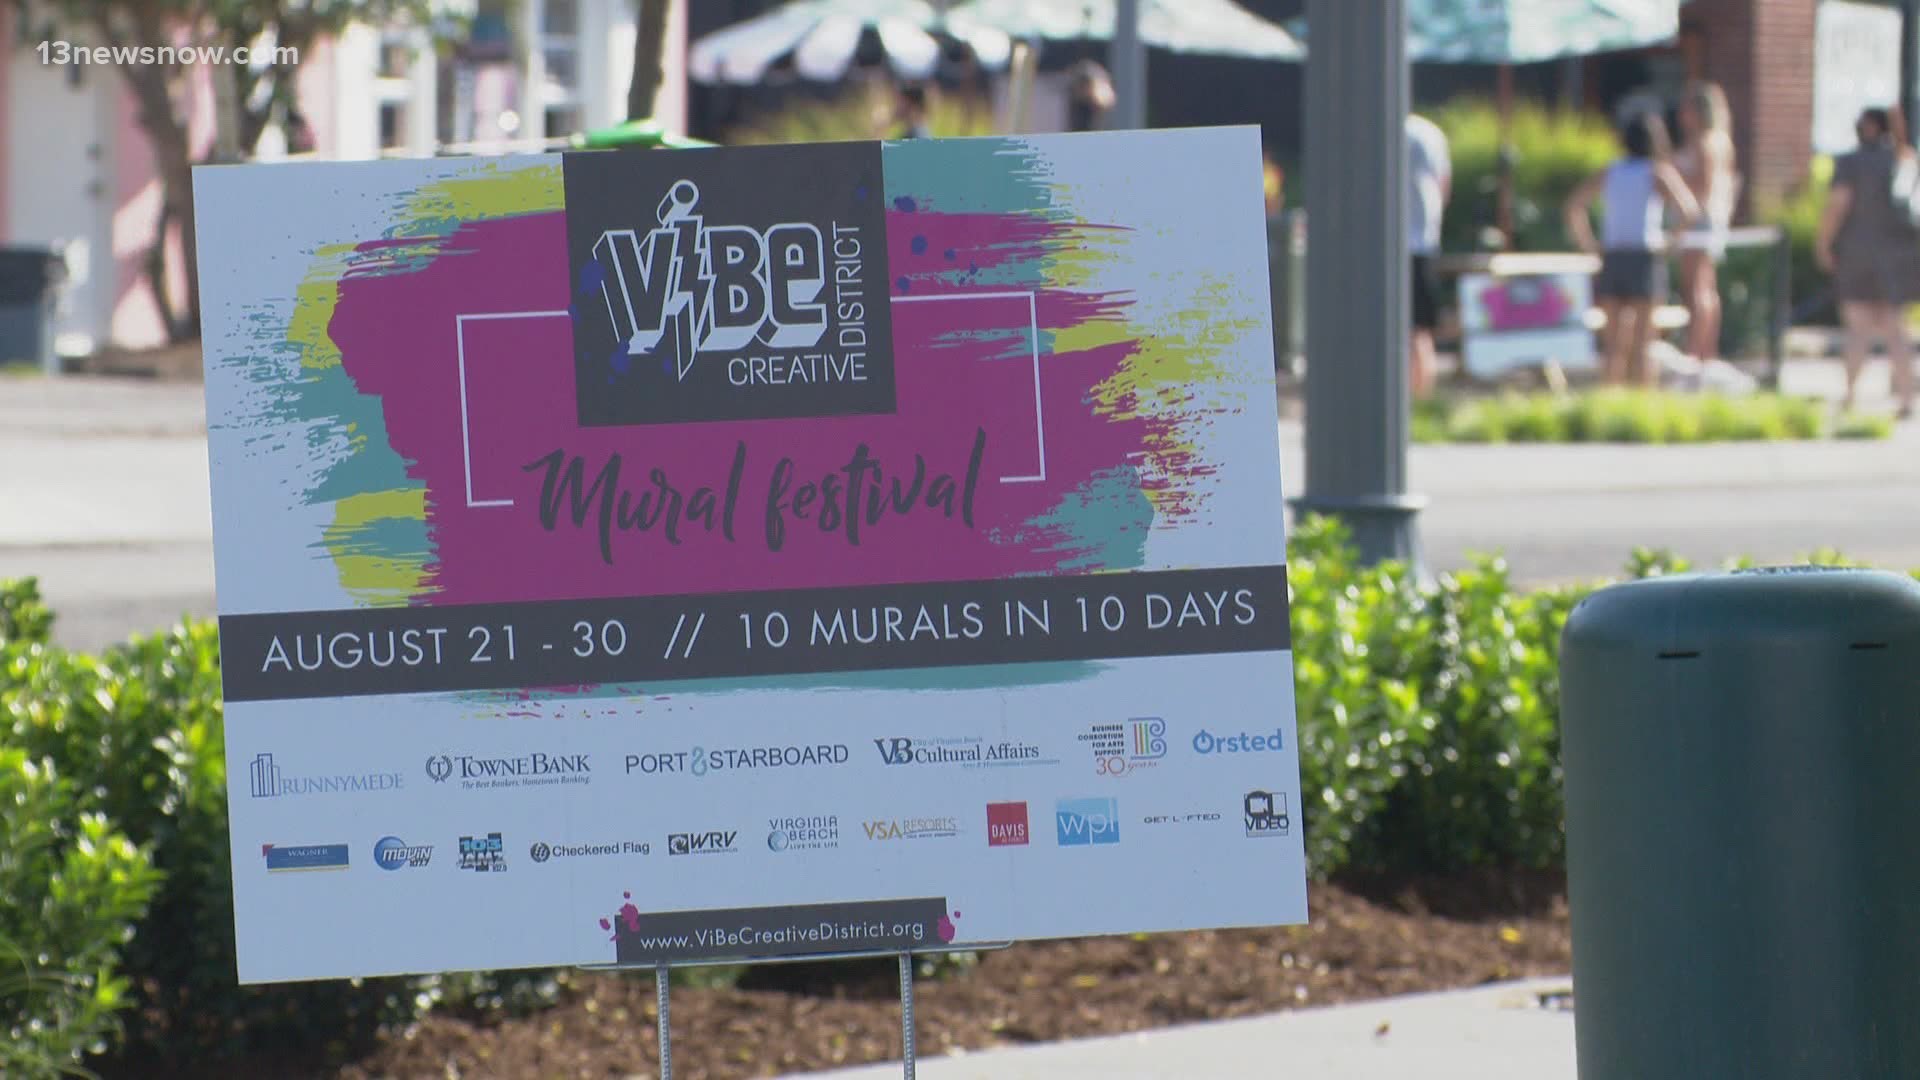 13News Now Dana Smith has more on the third annual Mural Festival taking place in the Virginia Beach ViBe Arts District where 10 artists will show off 10 murals.